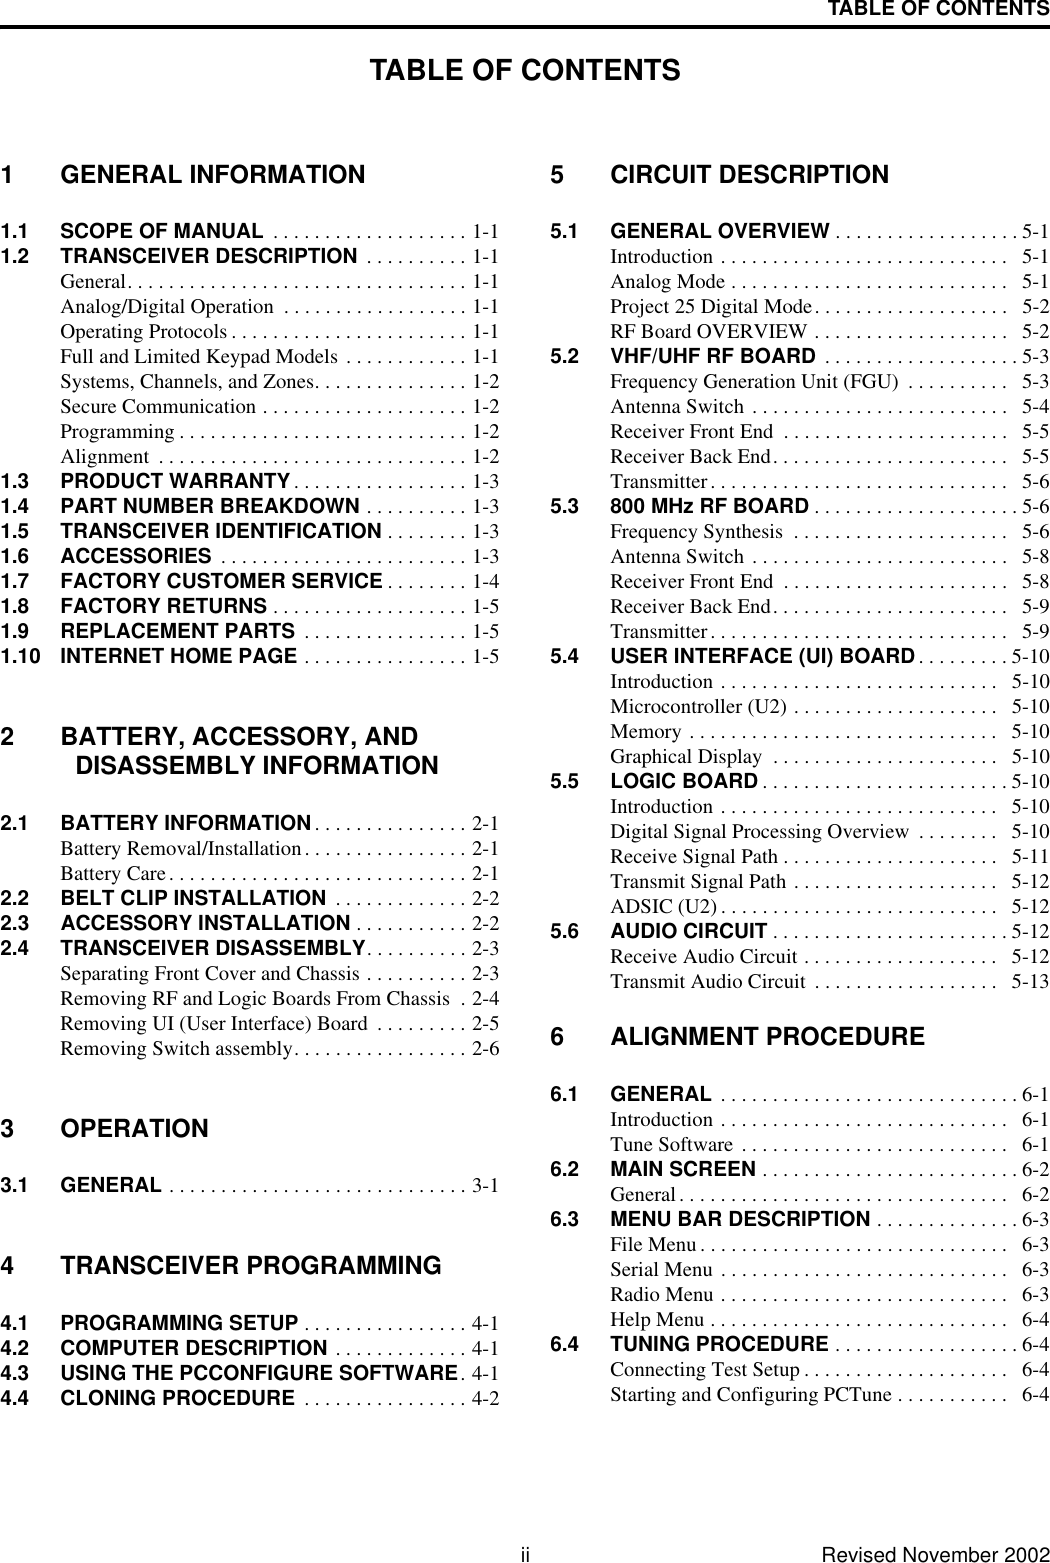 TABLE OF CONTENTSii Revised November 2002TABLE OF CONTENTS1 GENERAL INFORMATION1.1 SCOPE OF MANUAL  . . . . . . . . . . . . . . . . . . . 1-11.2 TRANSCEIVER DESCRIPTION  . . . . . . . . . . 1-1General. . . . . . . . . . . . . . . . . . . . . . . . . . . . . . . . . 1-1Analog/Digital Operation  . . . . . . . . . . . . . . . . . . 1-1Operating Protocols . . . . . . . . . . . . . . . . . . . . . . . 1-1Full and Limited Keypad Models . . . . . . . . . . . . 1-1Systems, Channels, and Zones. . . . . . . . . . . . . . . 1-2Secure Communication . . . . . . . . . . . . . . . . . . . . 1-2Programming . . . . . . . . . . . . . . . . . . . . . . . . . . . . 1-2Alignment  . . . . . . . . . . . . . . . . . . . . . . . . . . . . . . 1-21.3 PRODUCT WARRANTY . . . . . . . . . . . . . . . . . 1-31.4 PART NUMBER BREAKDOWN . . . . . . . . . . 1-31.5 TRANSCEIVER IDENTIFICATION . . . . . . . . 1-31.6 ACCESSORIES  . . . . . . . . . . . . . . . . . . . . . . . . 1-31.7 FACTORY CUSTOMER SERVICE . . . . . . . . 1-41.8 FACTORY RETURNS . . . . . . . . . . . . . . . . . . . 1-51.9 REPLACEMENT PARTS  . . . . . . . . . . . . . . . . 1-51.10 INTERNET HOME PAGE . . . . . . . . . . . . . . . . 1-52 BATTERY, ACCESSORY, AND DISASSEMBLY INFORMATION2.1 BATTERY INFORMATION . . . . . . . . . . . . . . . 2-1Battery Removal/Installation. . . . . . . . . . . . . . . . 2-1Battery Care. . . . . . . . . . . . . . . . . . . . . . . . . . . . . 2-12.2 BELT CLIP INSTALLATION  . . . . . . . . . . . . . 2-22.3 ACCESSORY INSTALLATION . . . . . . . . . . . 2-22.4 TRANSCEIVER DISASSEMBLY. . . . . . . . . . 2-3Separating Front Cover and Chassis . . . . . . . . . . 2-3Removing RF and Logic Boards From Chassis  . 2-4Removing UI (User Interface) Board  . . . . . . . . . 2-5Removing Switch assembly. . . . . . . . . . . . . . . . . 2-63 OPERATION3.1 GENERAL . . . . . . . . . . . . . . . . . . . . . . . . . . . . . 3-14 TRANSCEIVER PROGRAMMING4.1 PROGRAMMING SETUP . . . . . . . . . . . . . . . . 4-14.2 COMPUTER DESCRIPTION . . . . . . . . . . . . . 4-14.3 USING THE PCCONFIGURE SOFTWARE. 4-14.4 CLONING PROCEDURE  . . . . . . . . . . . . . . . . 4-25 CIRCUIT DESCRIPTION5.1 GENERAL OVERVIEW . . . . . . . . . . . . . . . . . . 5-1Introduction . . . . . . . . . . . . . . . . . . . . . . . . . . . .   5-1Analog Mode . . . . . . . . . . . . . . . . . . . . . . . . . . .   5-1Project 25 Digital Mode. . . . . . . . . . . . . . . . . . .   5-2RF Board OVERVIEW . . . . . . . . . . . . . . . . . . .   5-25.2 VHF/UHF RF BOARD  . . . . . . . . . . . . . . . . . . . 5-3Frequency Generation Unit (FGU)  . . . . . . . . . .   5-3Antenna Switch . . . . . . . . . . . . . . . . . . . . . . . . .   5-4Receiver Front End  . . . . . . . . . . . . . . . . . . . . . .   5-5Receiver Back End. . . . . . . . . . . . . . . . . . . . . . .   5-5Transmitter. . . . . . . . . . . . . . . . . . . . . . . . . . . . .   5-65.3 800 MHz RF BOARD . . . . . . . . . . . . . . . . . . . . 5-6Frequency Synthesis  . . . . . . . . . . . . . . . . . . . . .   5-6Antenna Switch . . . . . . . . . . . . . . . . . . . . . . . . .   5-8Receiver Front End  . . . . . . . . . . . . . . . . . . . . . .   5-8Receiver Back End. . . . . . . . . . . . . . . . . . . . . . .   5-9Transmitter. . . . . . . . . . . . . . . . . . . . . . . . . . . . .   5-95.4 USER INTERFACE (UI) BOARD . . . . . . . . . 5-10Introduction . . . . . . . . . . . . . . . . . . . . . . . . . . .   5-10Microcontroller (U2) . . . . . . . . . . . . . . . . . . . .   5-10Memory . . . . . . . . . . . . . . . . . . . . . . . . . . . . . .   5-10Graphical Display  . . . . . . . . . . . . . . . . . . . . . .   5-105.5 LOGIC BOARD . . . . . . . . . . . . . . . . . . . . . . . . 5-10Introduction . . . . . . . . . . . . . . . . . . . . . . . . . . .   5-10Digital Signal Processing Overview  . . . . . . . .   5-10Receive Signal Path . . . . . . . . . . . . . . . . . . . . .   5-11Transmit Signal Path . . . . . . . . . . . . . . . . . . . .   5-12ADSIC (U2) . . . . . . . . . . . . . . . . . . . . . . . . . . .   5-125.6 AUDIO CIRCUIT . . . . . . . . . . . . . . . . . . . . . . . 5-12Receive Audio Circuit . . . . . . . . . . . . . . . . . . .   5-12Transmit Audio Circuit  . . . . . . . . . . . . . . . . . .   5-136 ALIGNMENT PROCEDURE6.1 GENERAL  . . . . . . . . . . . . . . . . . . . . . . . . . . . . . 6-1Introduction . . . . . . . . . . . . . . . . . . . . . . . . . . . .   6-1Tune Software . . . . . . . . . . . . . . . . . . . . . . . . . .   6-16.2 MAIN SCREEN . . . . . . . . . . . . . . . . . . . . . . . . . 6-2General. . . . . . . . . . . . . . . . . . . . . . . . . . . . . . . .   6-26.3 MENU BAR DESCRIPTION . . . . . . . . . . . . . . 6-3File Menu . . . . . . . . . . . . . . . . . . . . . . . . . . . . . .   6-3Serial Menu . . . . . . . . . . . . . . . . . . . . . . . . . . . .   6-3Radio Menu . . . . . . . . . . . . . . . . . . . . . . . . . . . .   6-3Help Menu . . . . . . . . . . . . . . . . . . . . . . . . . . . . .   6-46.4 TUNING PROCEDURE . . . . . . . . . . . . . . . . . . 6-4Connecting Test Setup . . . . . . . . . . . . . . . . . . . .   6-4Starting and Configuring PCTune . . . . . . . . . . .   6-4